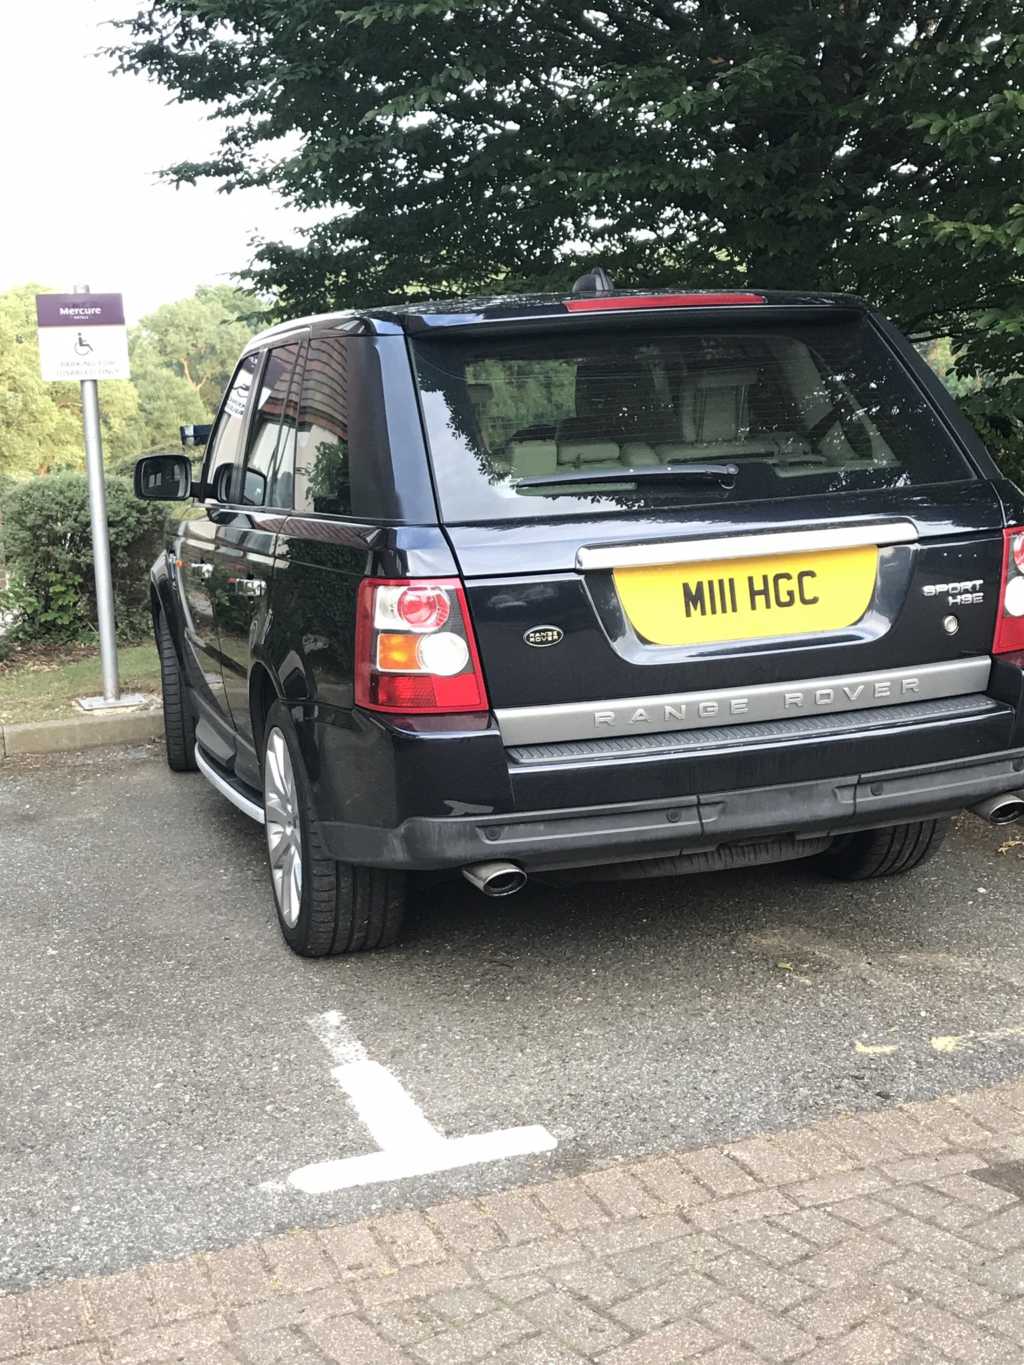 M111 HGC is an Inconsiderate Parker